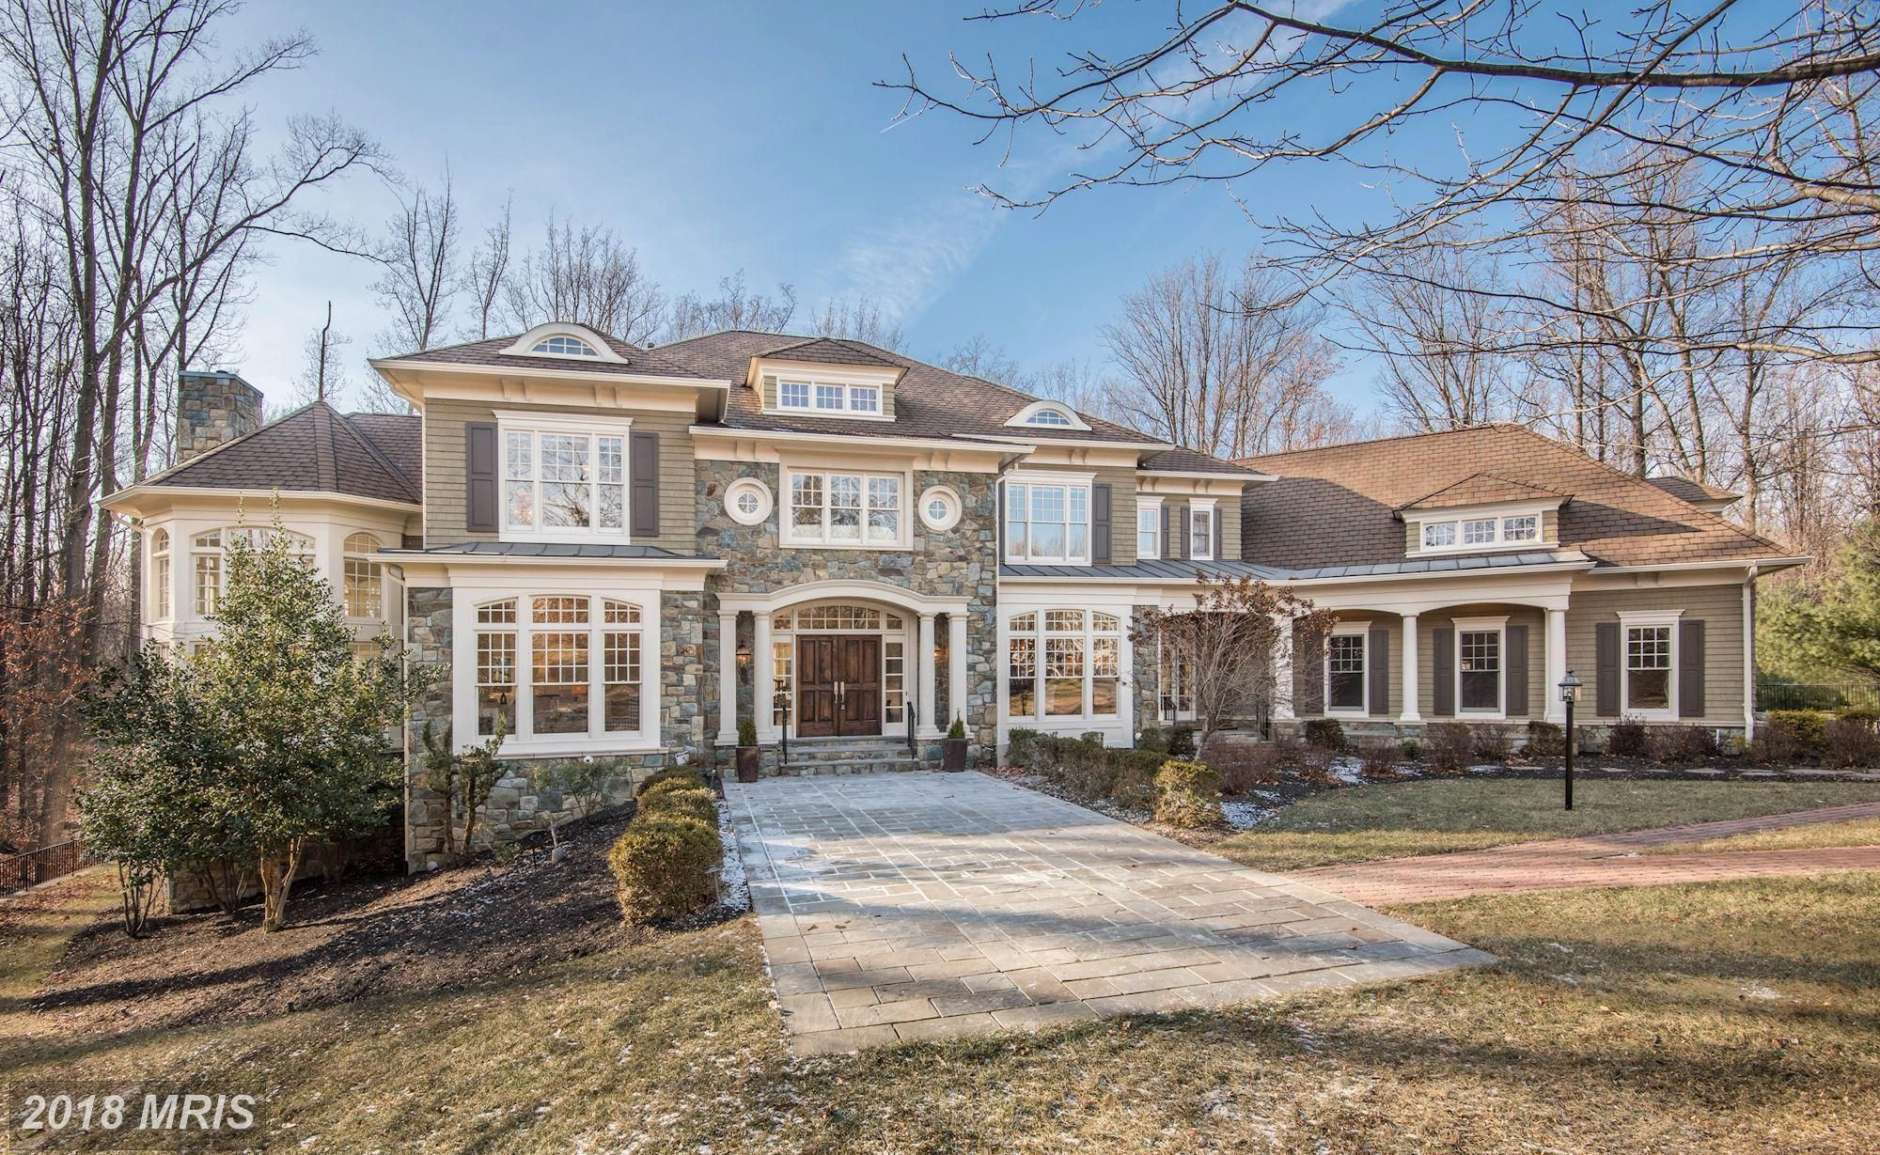 9. $2,950,000

7849 Westmont Lane
McLean, Virginia

This colonial-style home was built in 2006 and includes seven bedrooms and full bathrooms. (Courtesy Bright MLS)